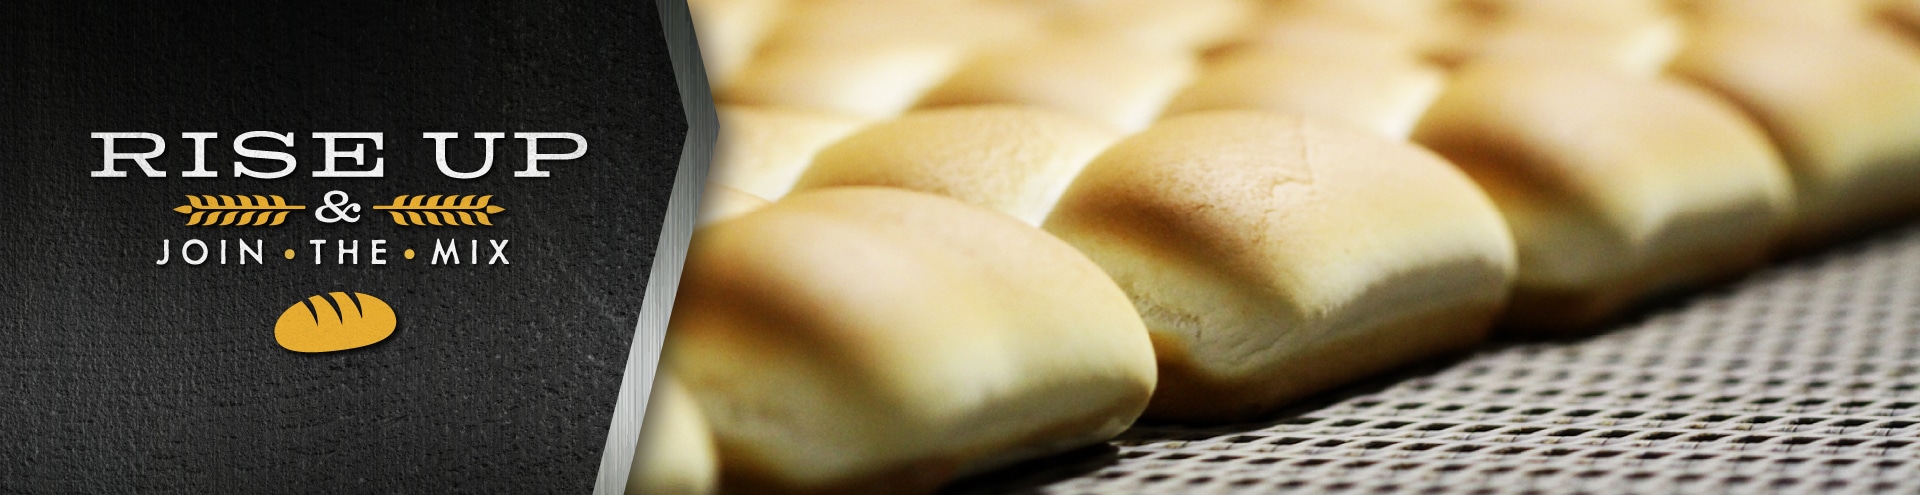 Online banner features a close up image of bread buns in the Pan-O-Gold Baking Company and the text "Rise Up & Join The Mix" and the loaf of bread icon in orange